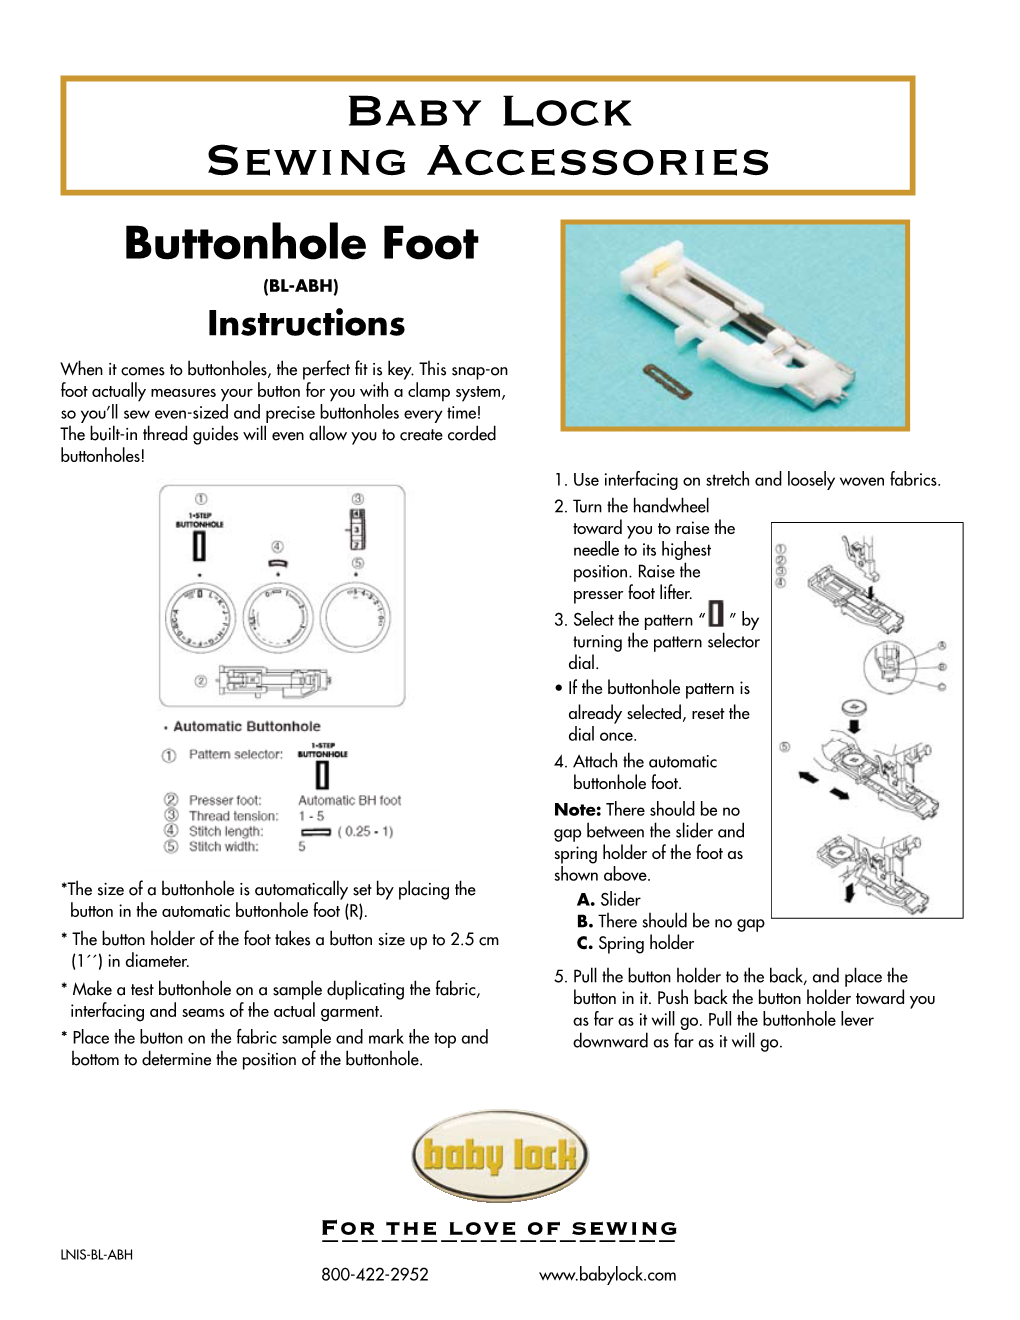 Buttonhole Foot (BL-ABH) Instructions